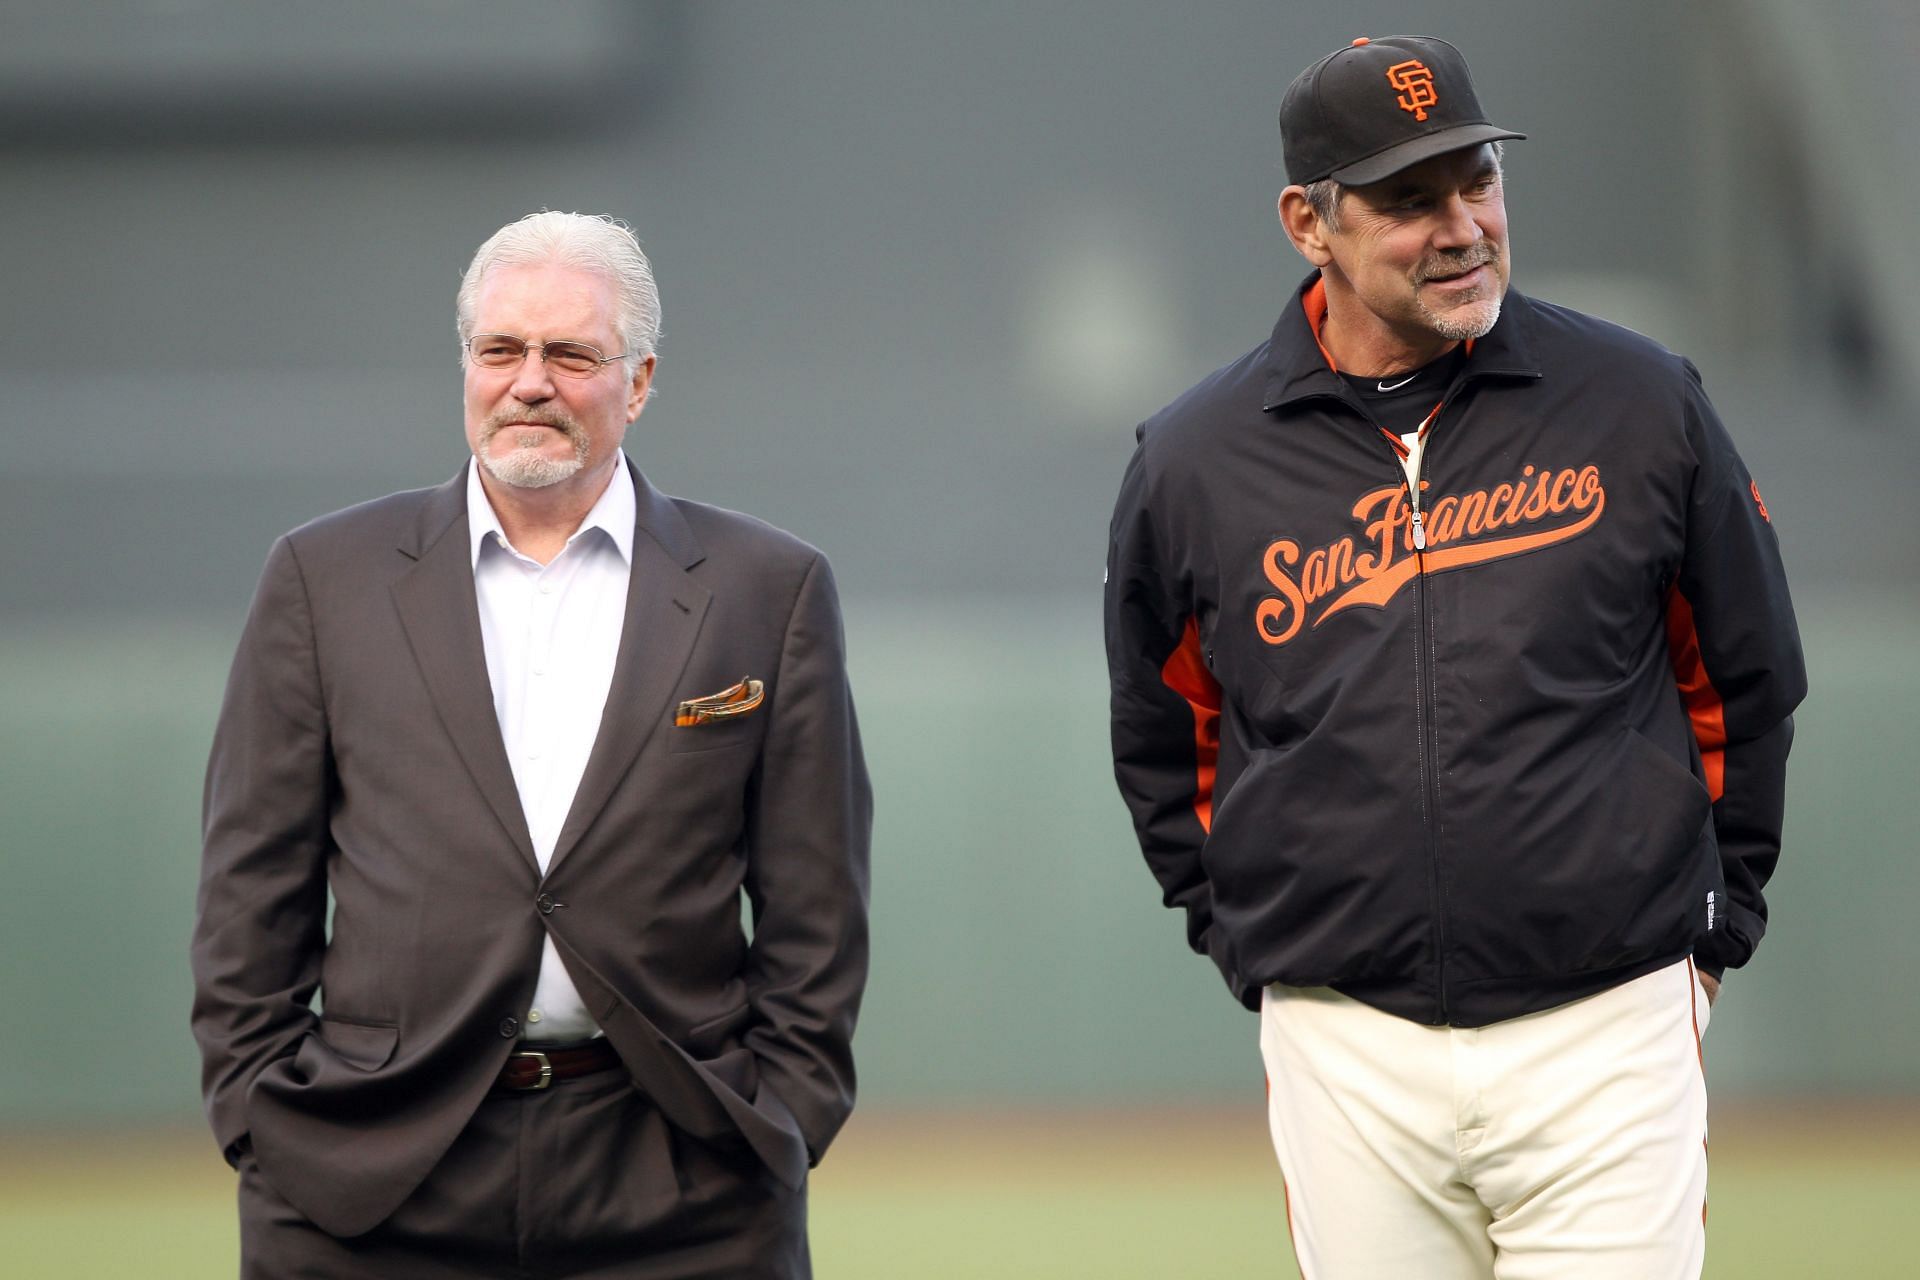 Bruce Bochy and Brian Sabean prove that their careers are far from over  with new roles in 2023: “Everybody said we were dinosaurs